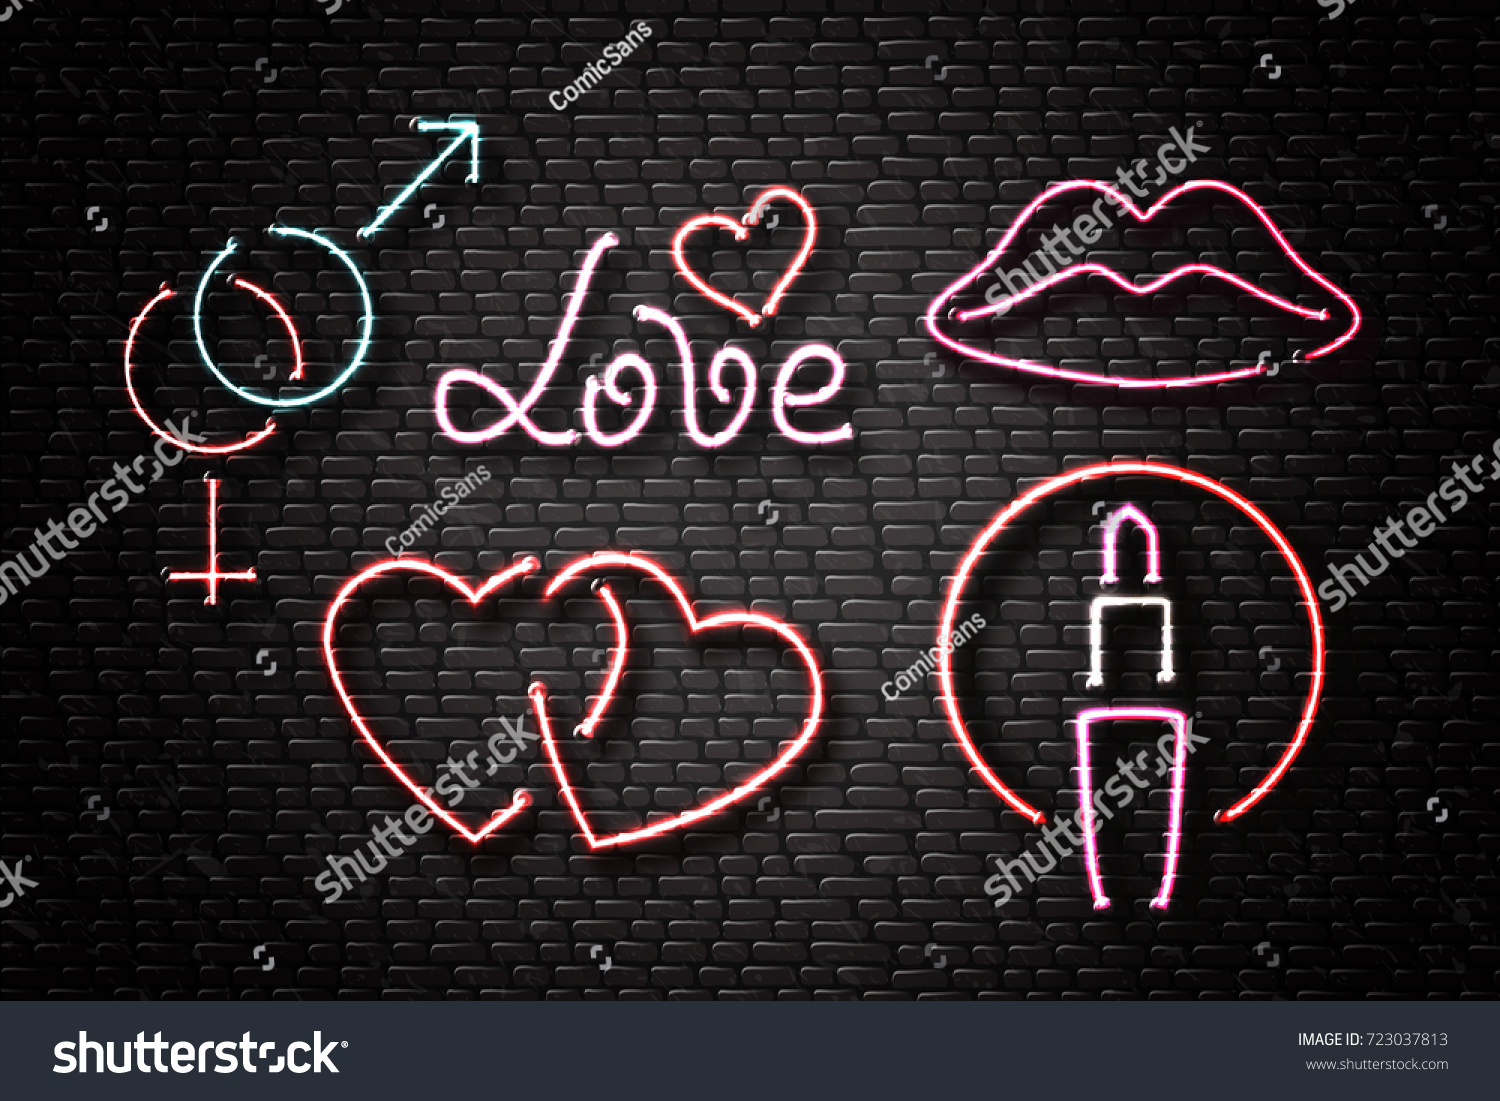 Vector Set Realistic Isolated Neon Erotic Stock Vector Royalty Free 723037813 Shutterstock 7295